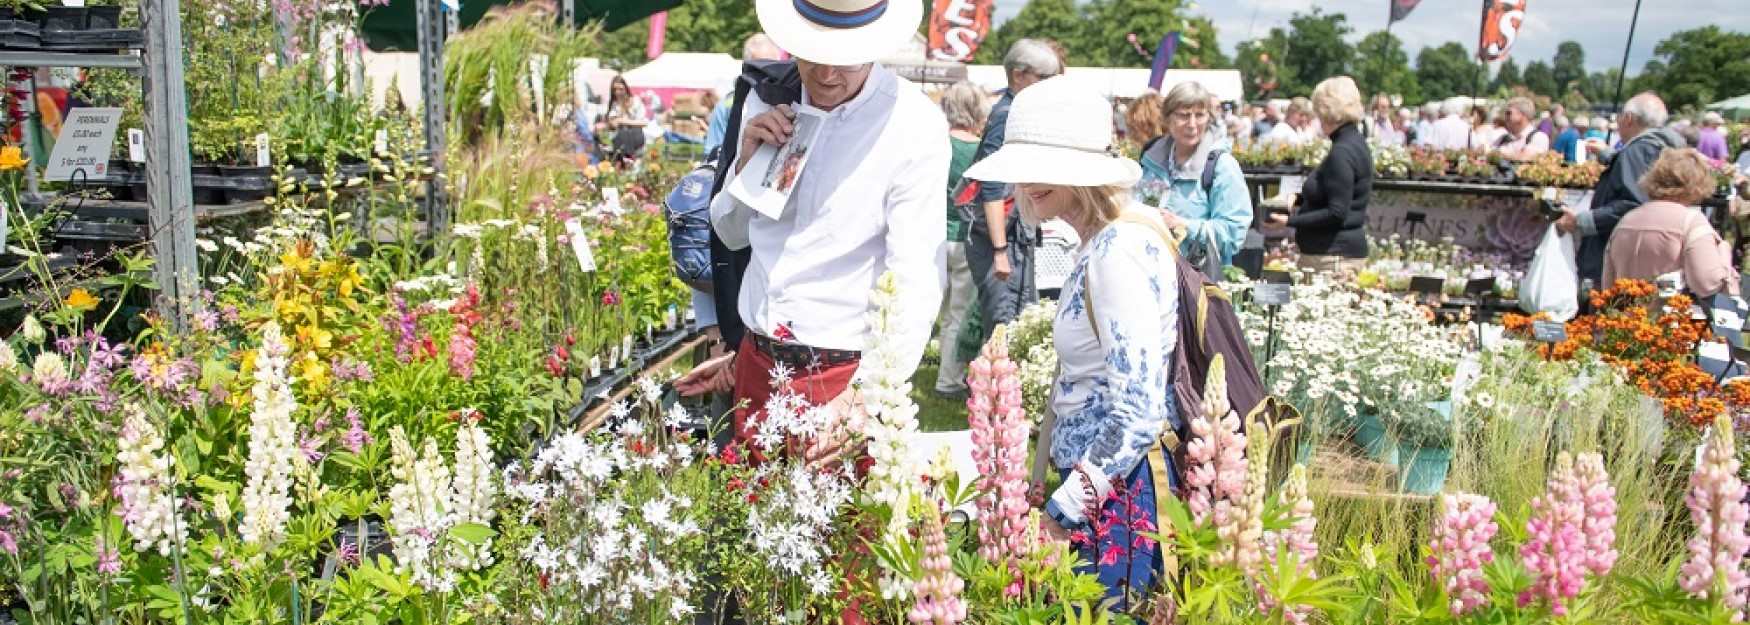 Couple admiring flowers at Blenheim Palace Flower Show